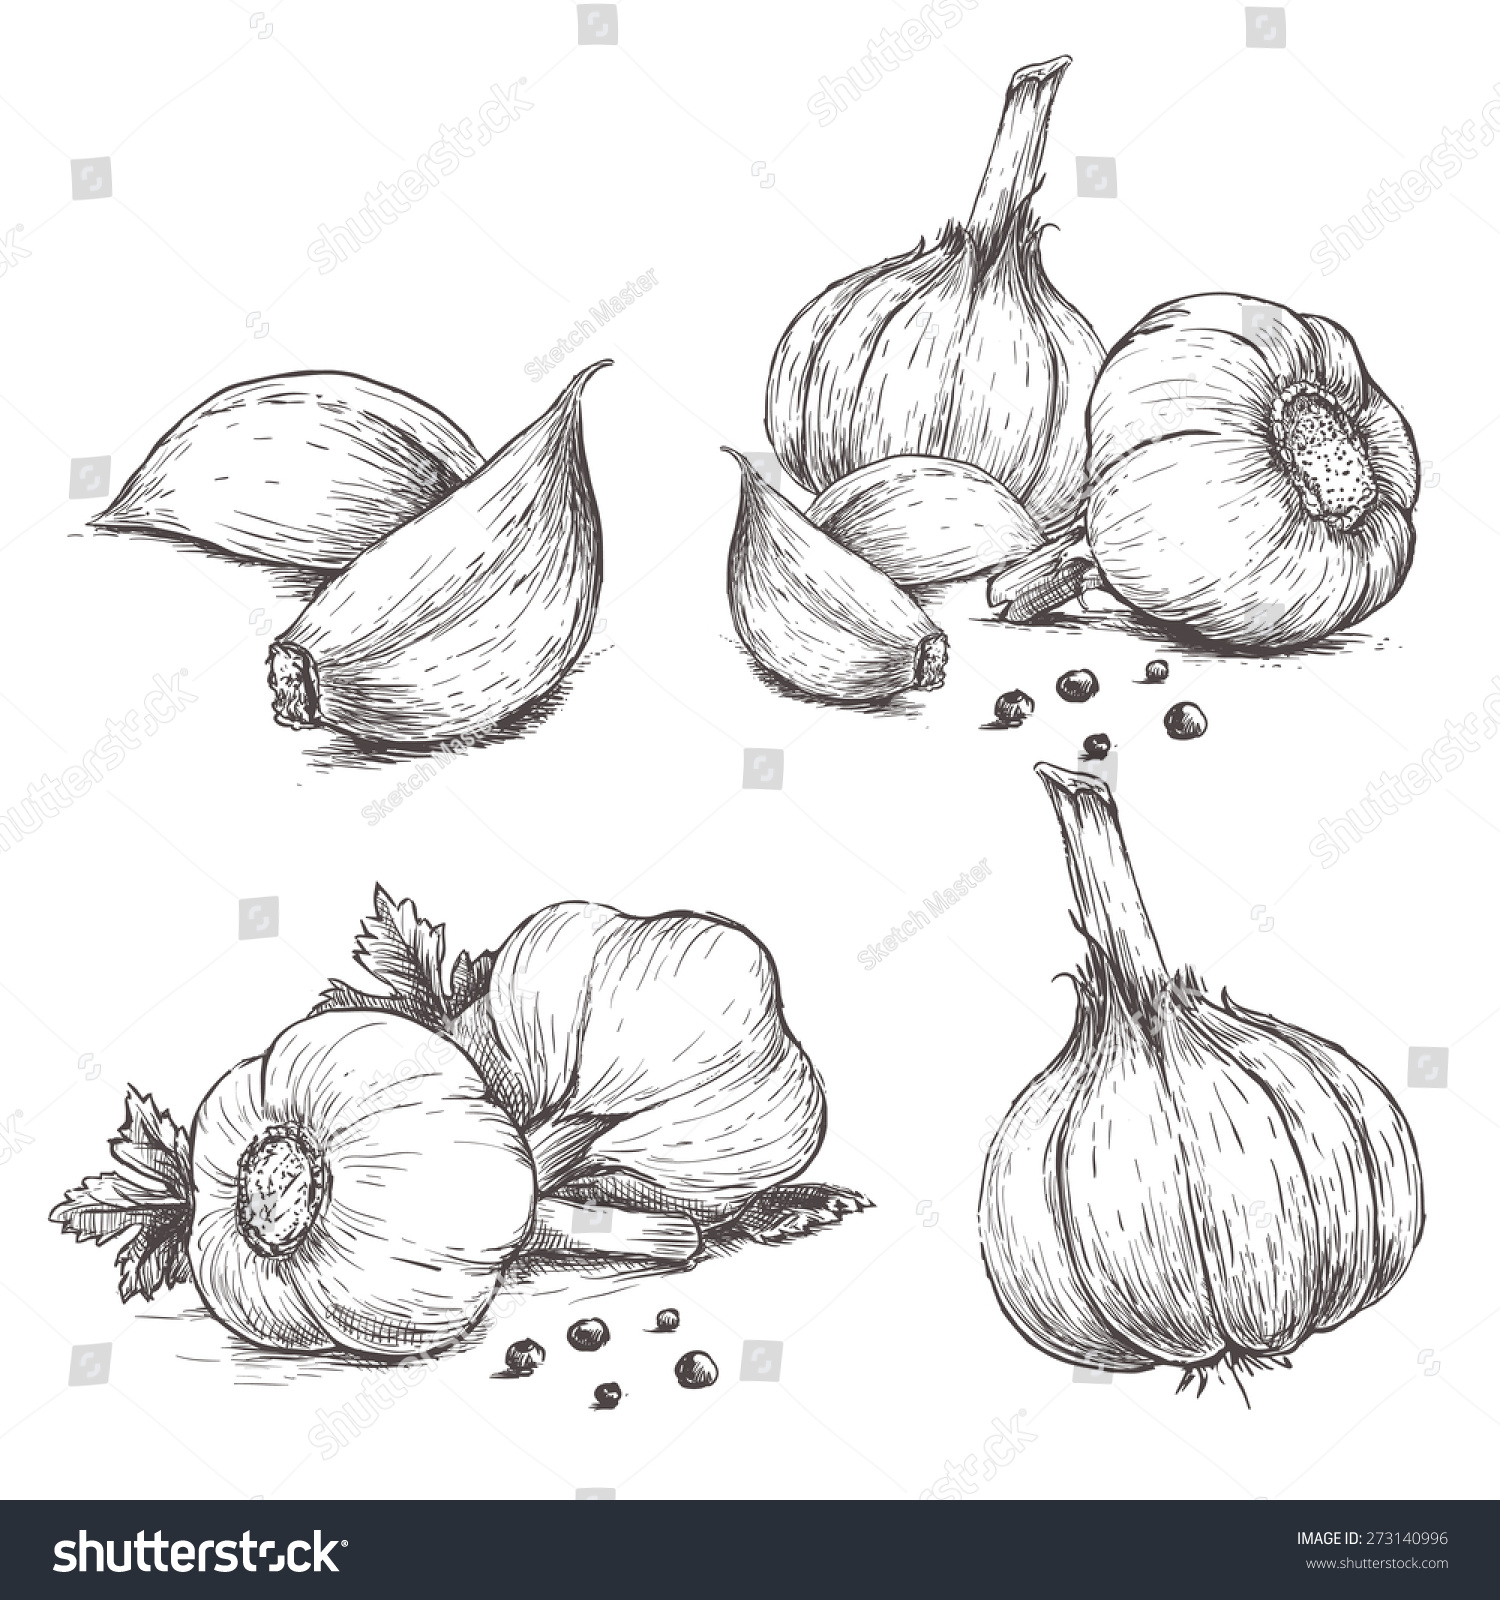 Vector hand drawn set of garlic. Herbs and spices sketch illustration #273140996